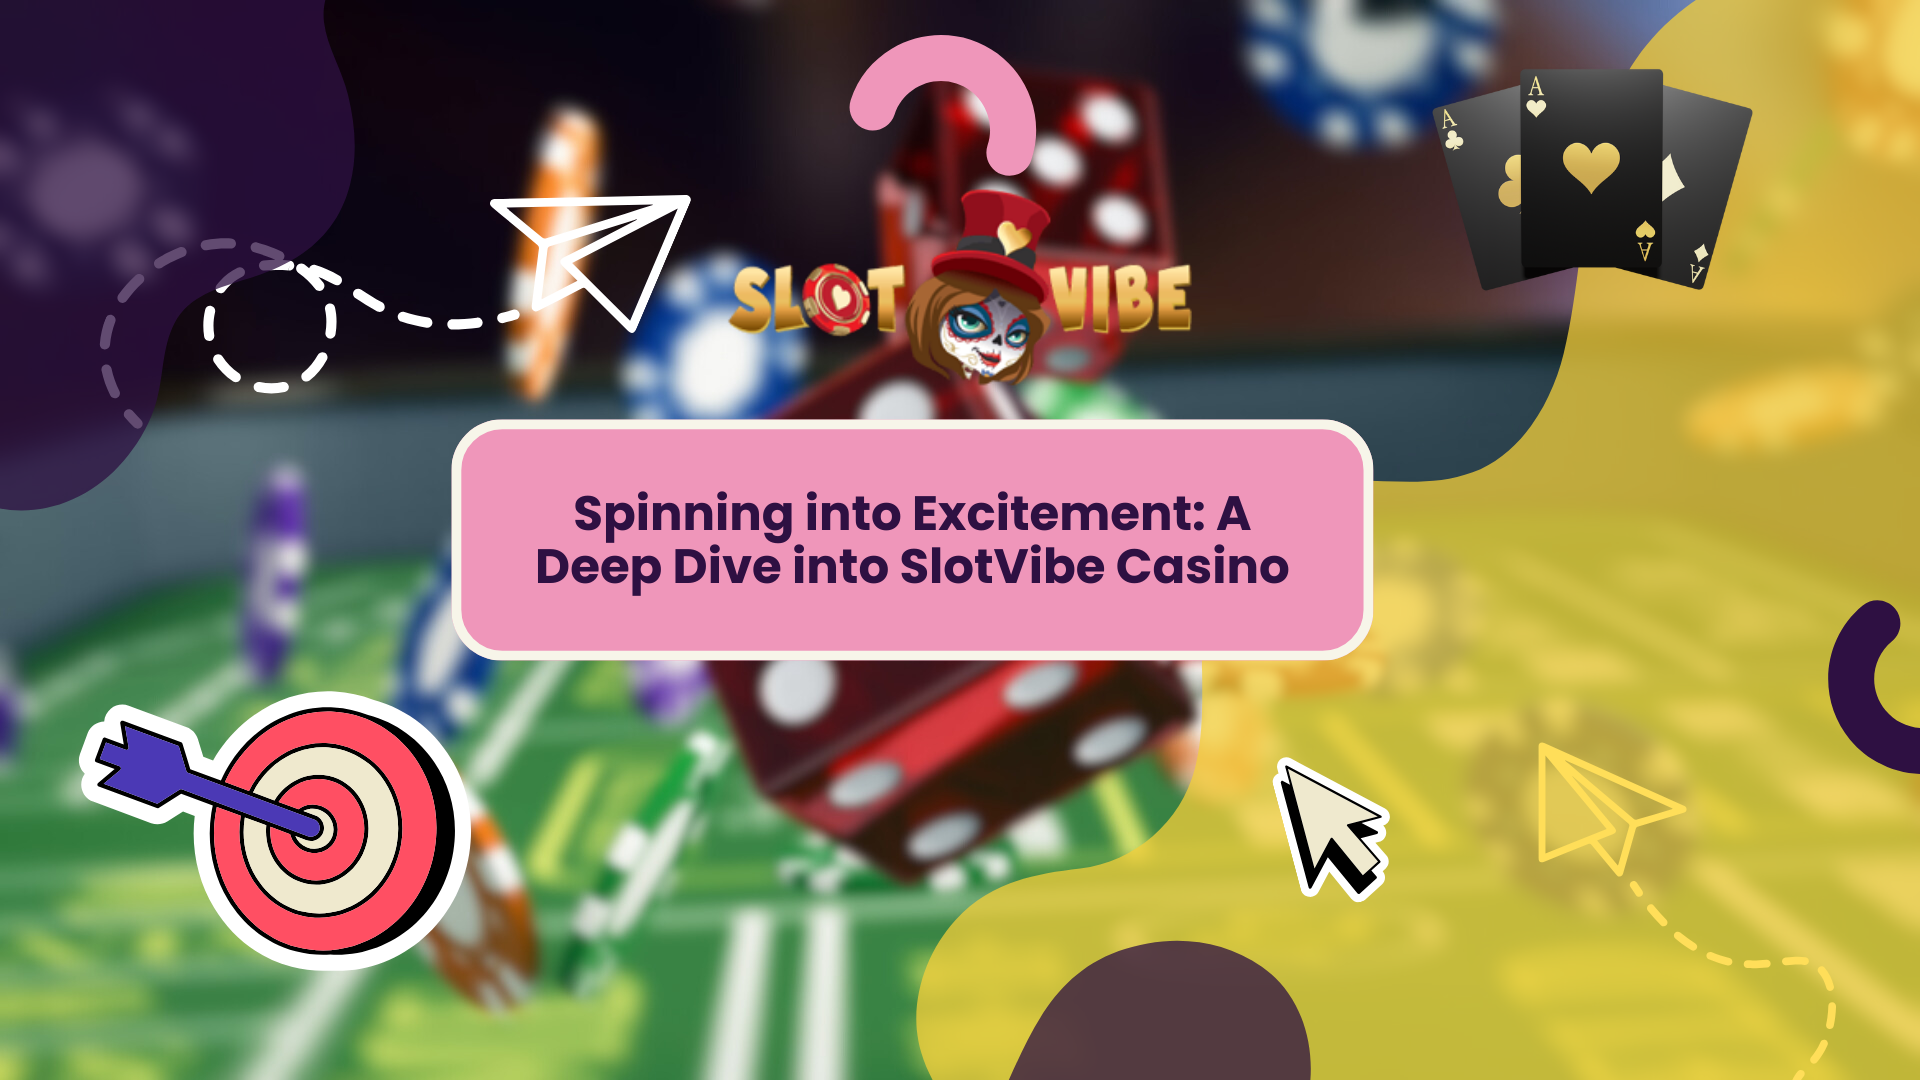 Spinning into Excitement: A Deep Dive into SlotVibe Casino